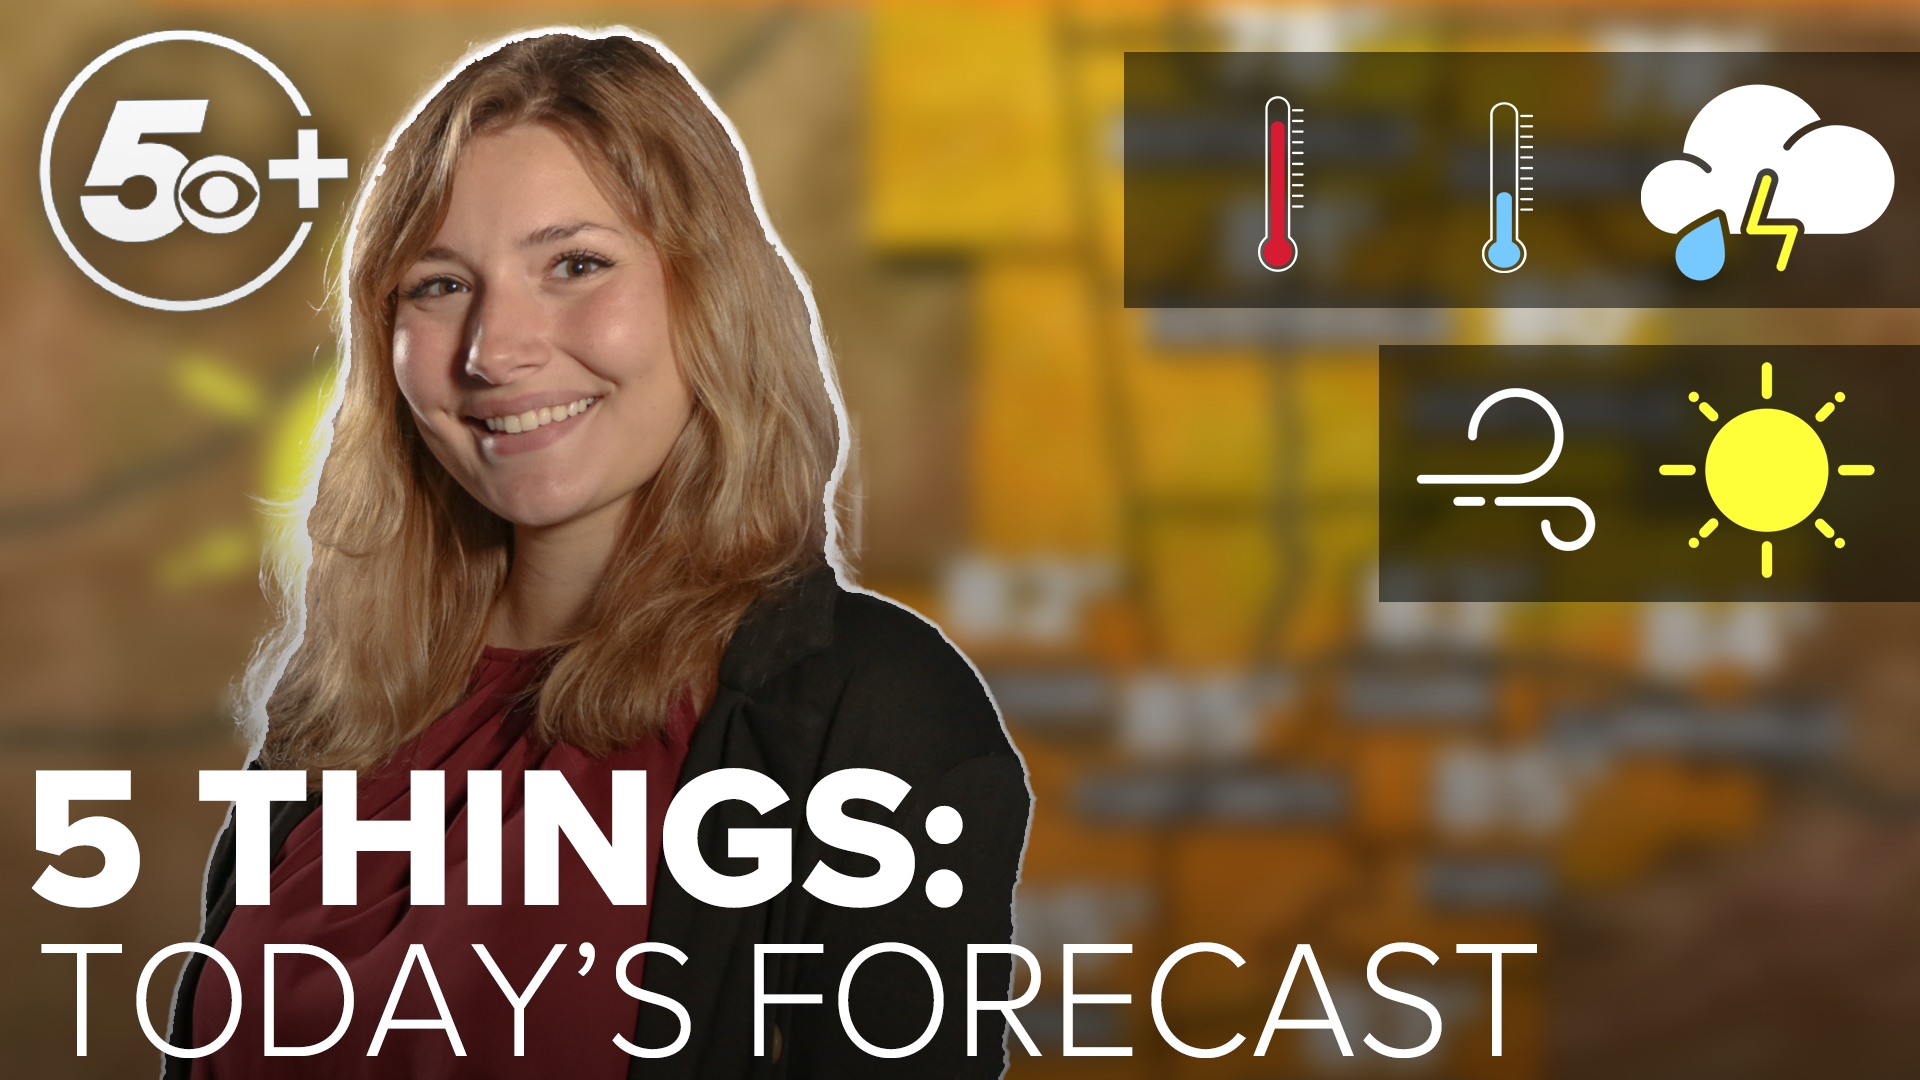 5NEWS Meteorologist Bella Grace is covering everything you need to know about today's weather in our area.